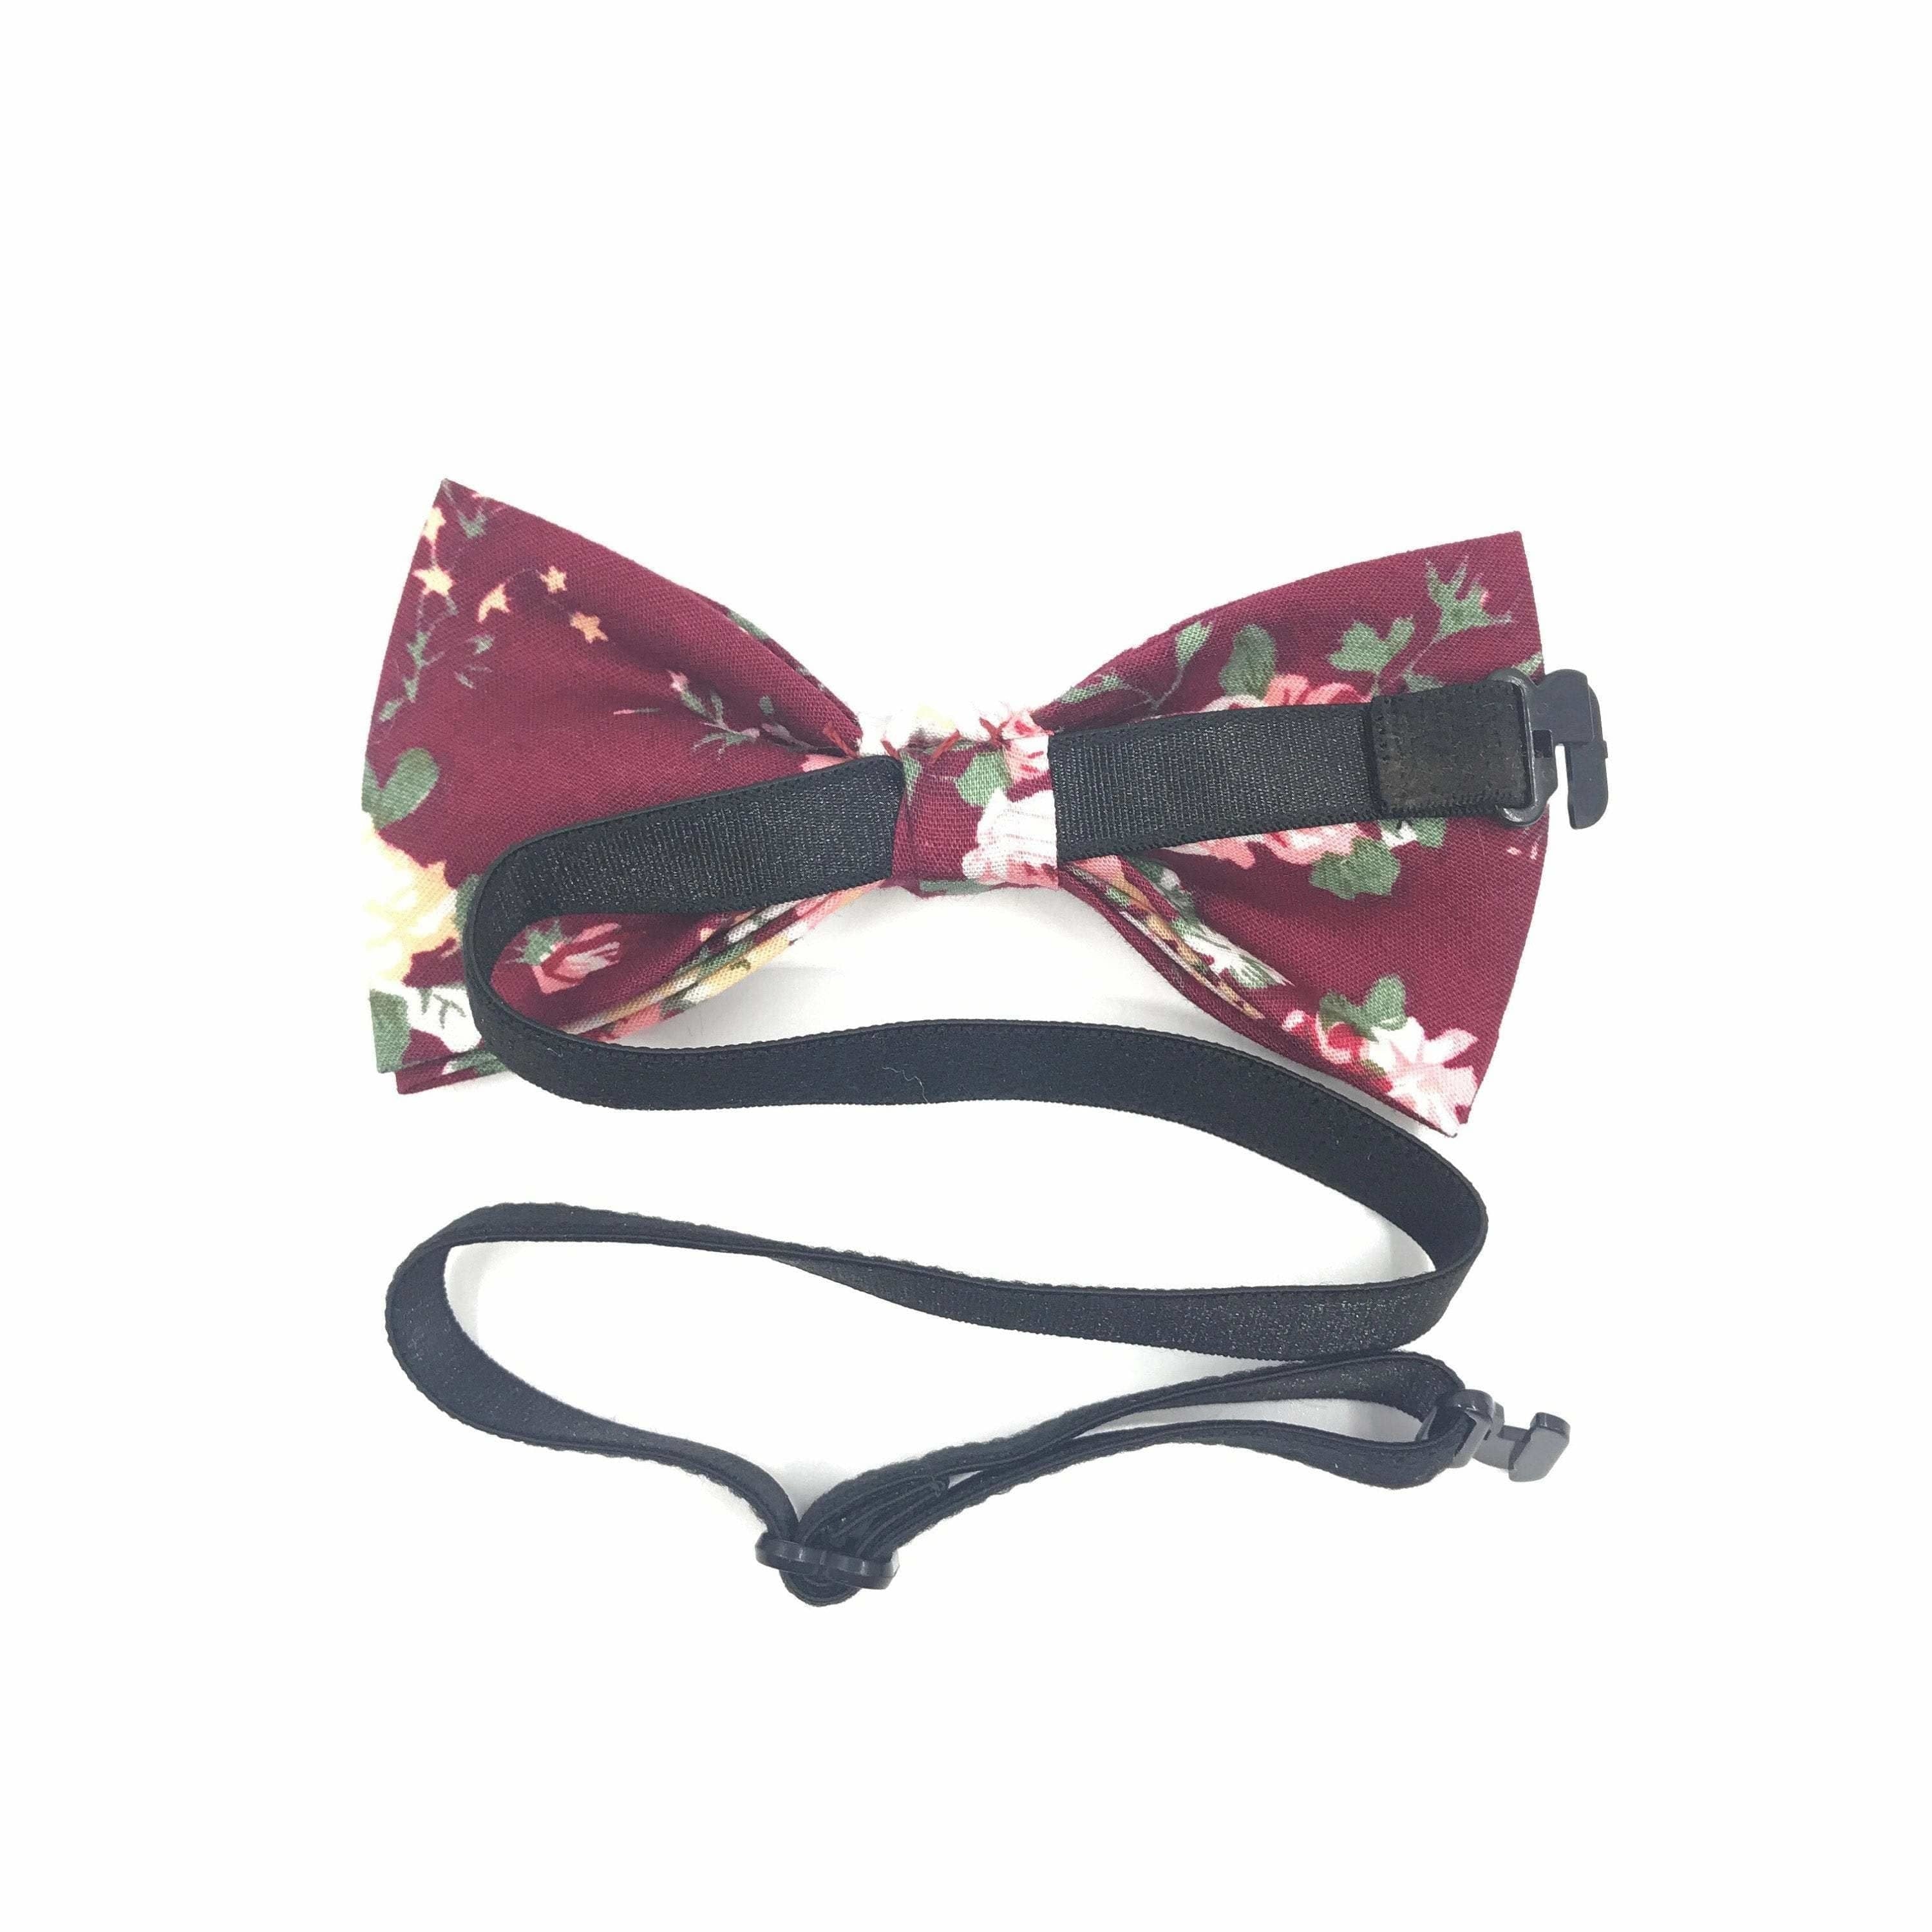 Kids Bow Tie Floral Pre-Tied Bow Tie WESLEY- MYTIESHOP-Floral Kid's bow tie - Wesley Strap is adjustablePre-Tied bowtieBow Tie 10.5 * 6CM Color: Burgundy Your little gentleman will look dapper in this burgundy floral bow tie. This pre-tied bow tie comes in a range of sizes to fit your child perfectly. The vibrant flowers against the dark background make this tie a stand-out piece. Add this bow tie to your child's wardrobe for a special occasions or even just to add a touch of refinement to their